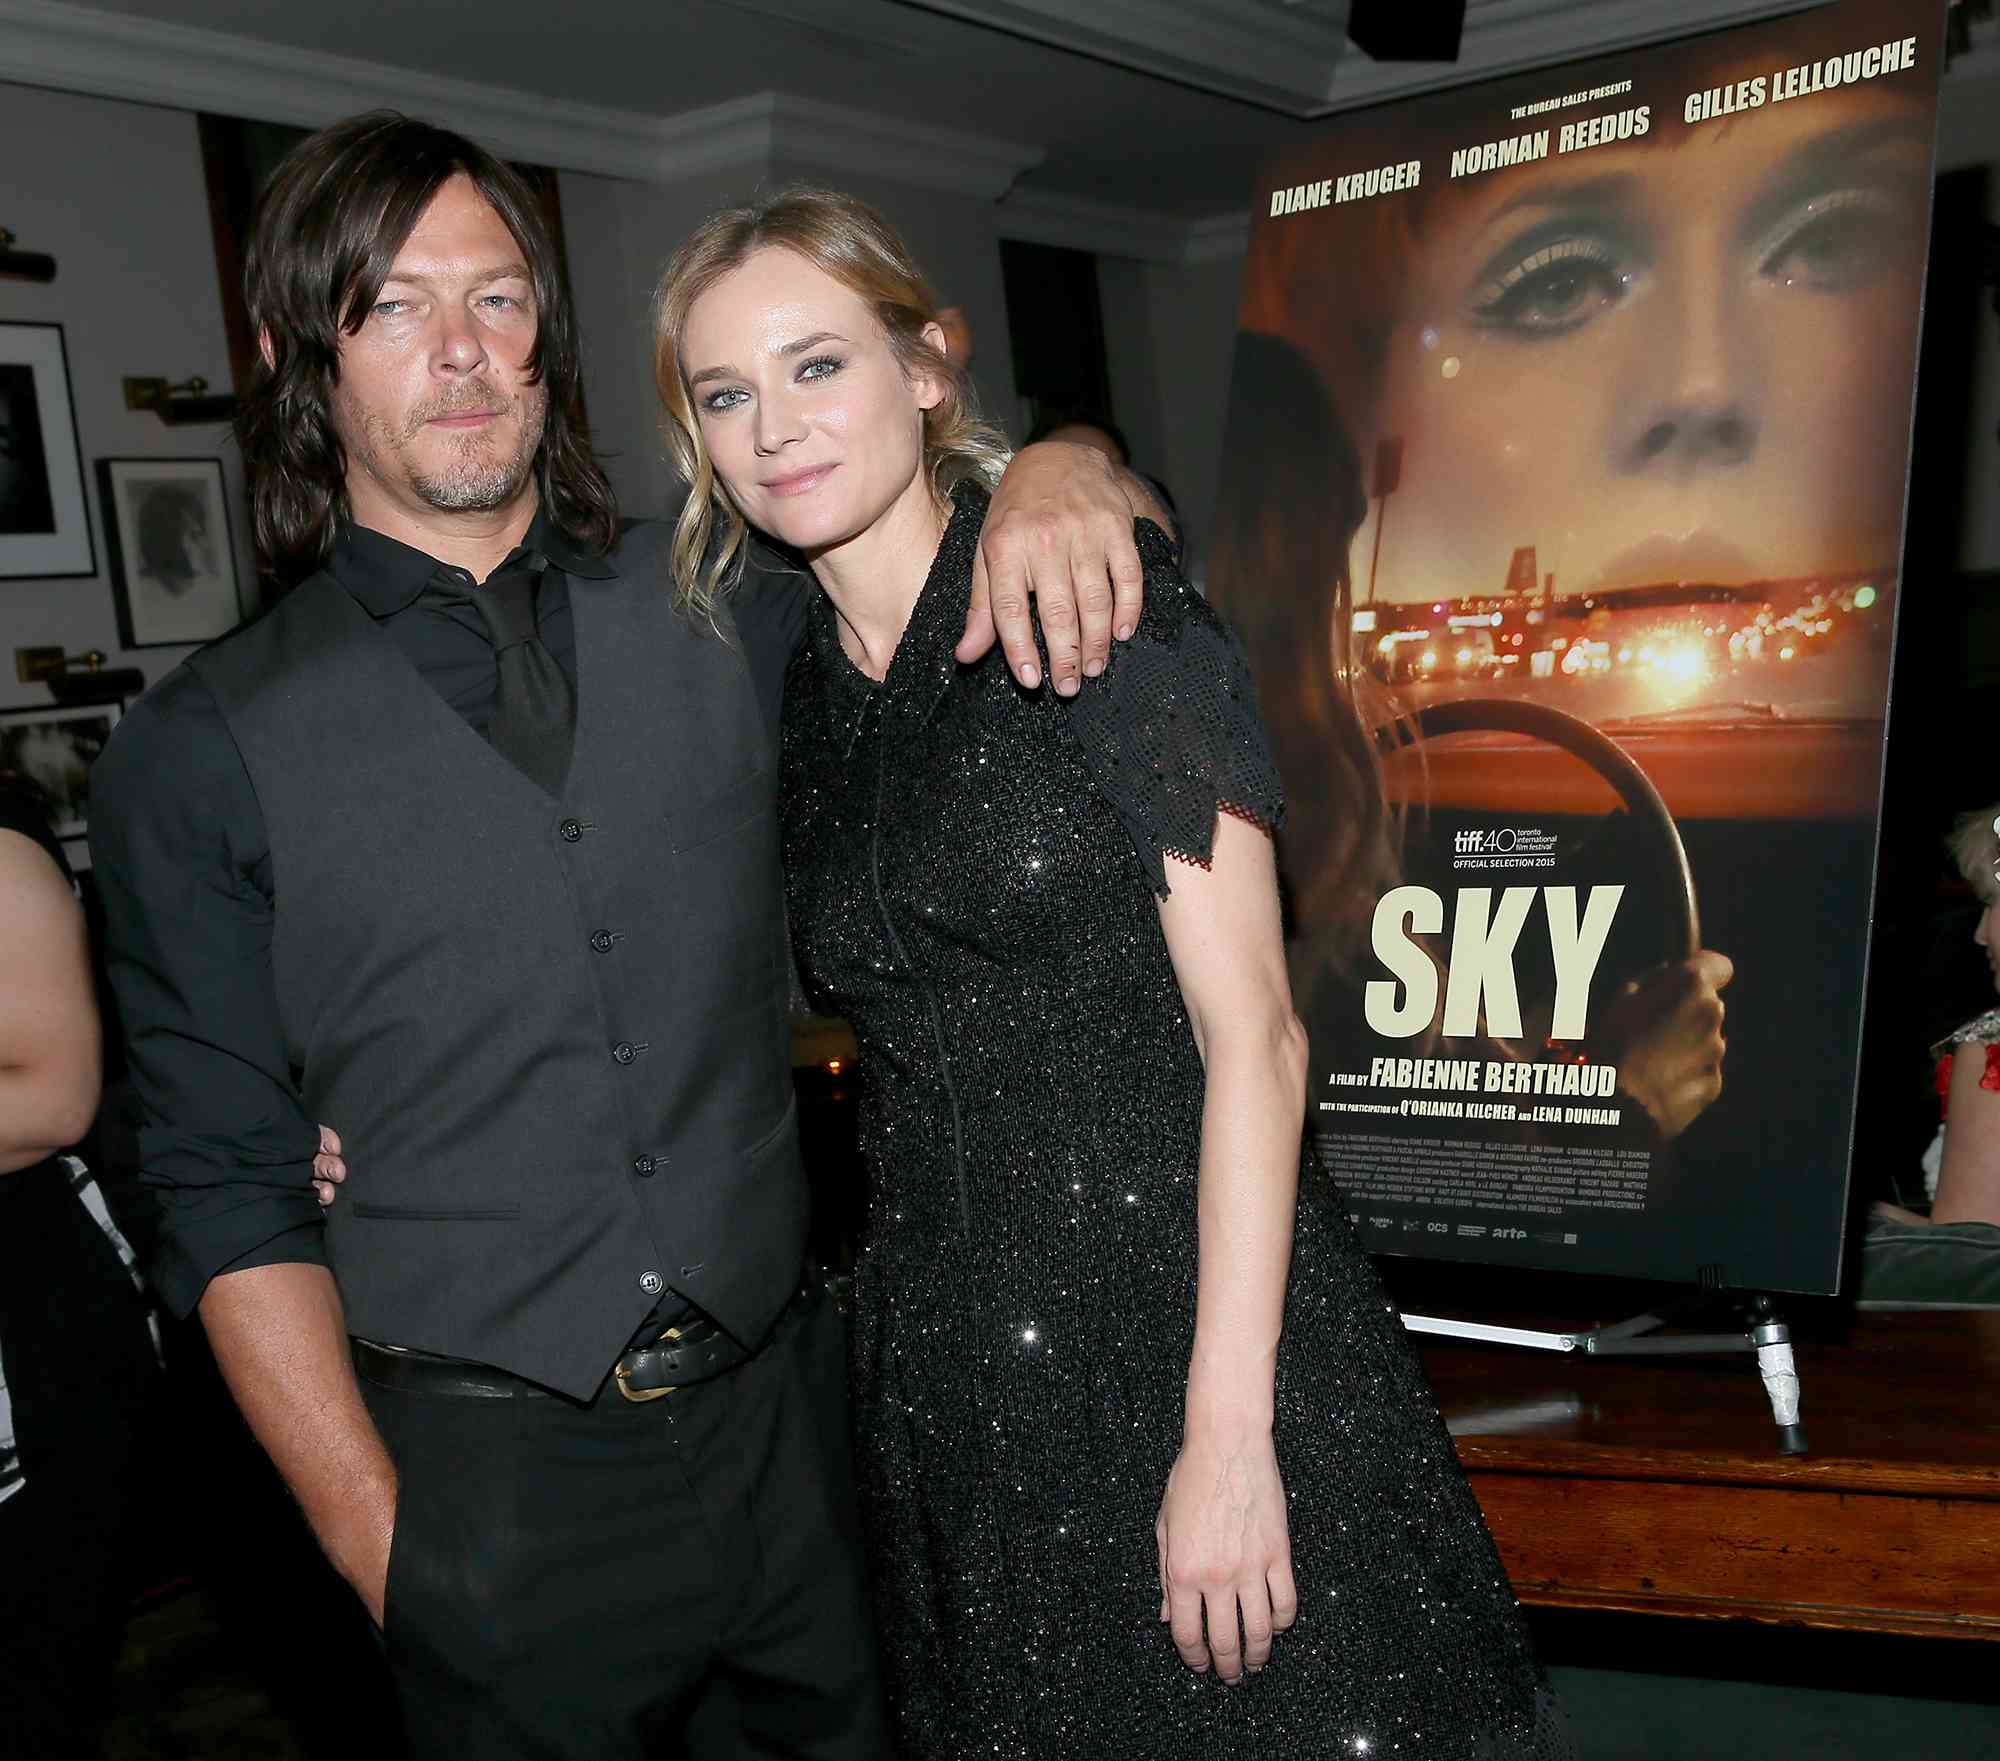 Norman Reedus (L) and Diane Kruger attend the CHANEL party for "Sky" during the 2015 Toronto International Film Festival at Soho House Toronto on September 16, 2015 in Toronto, Canada